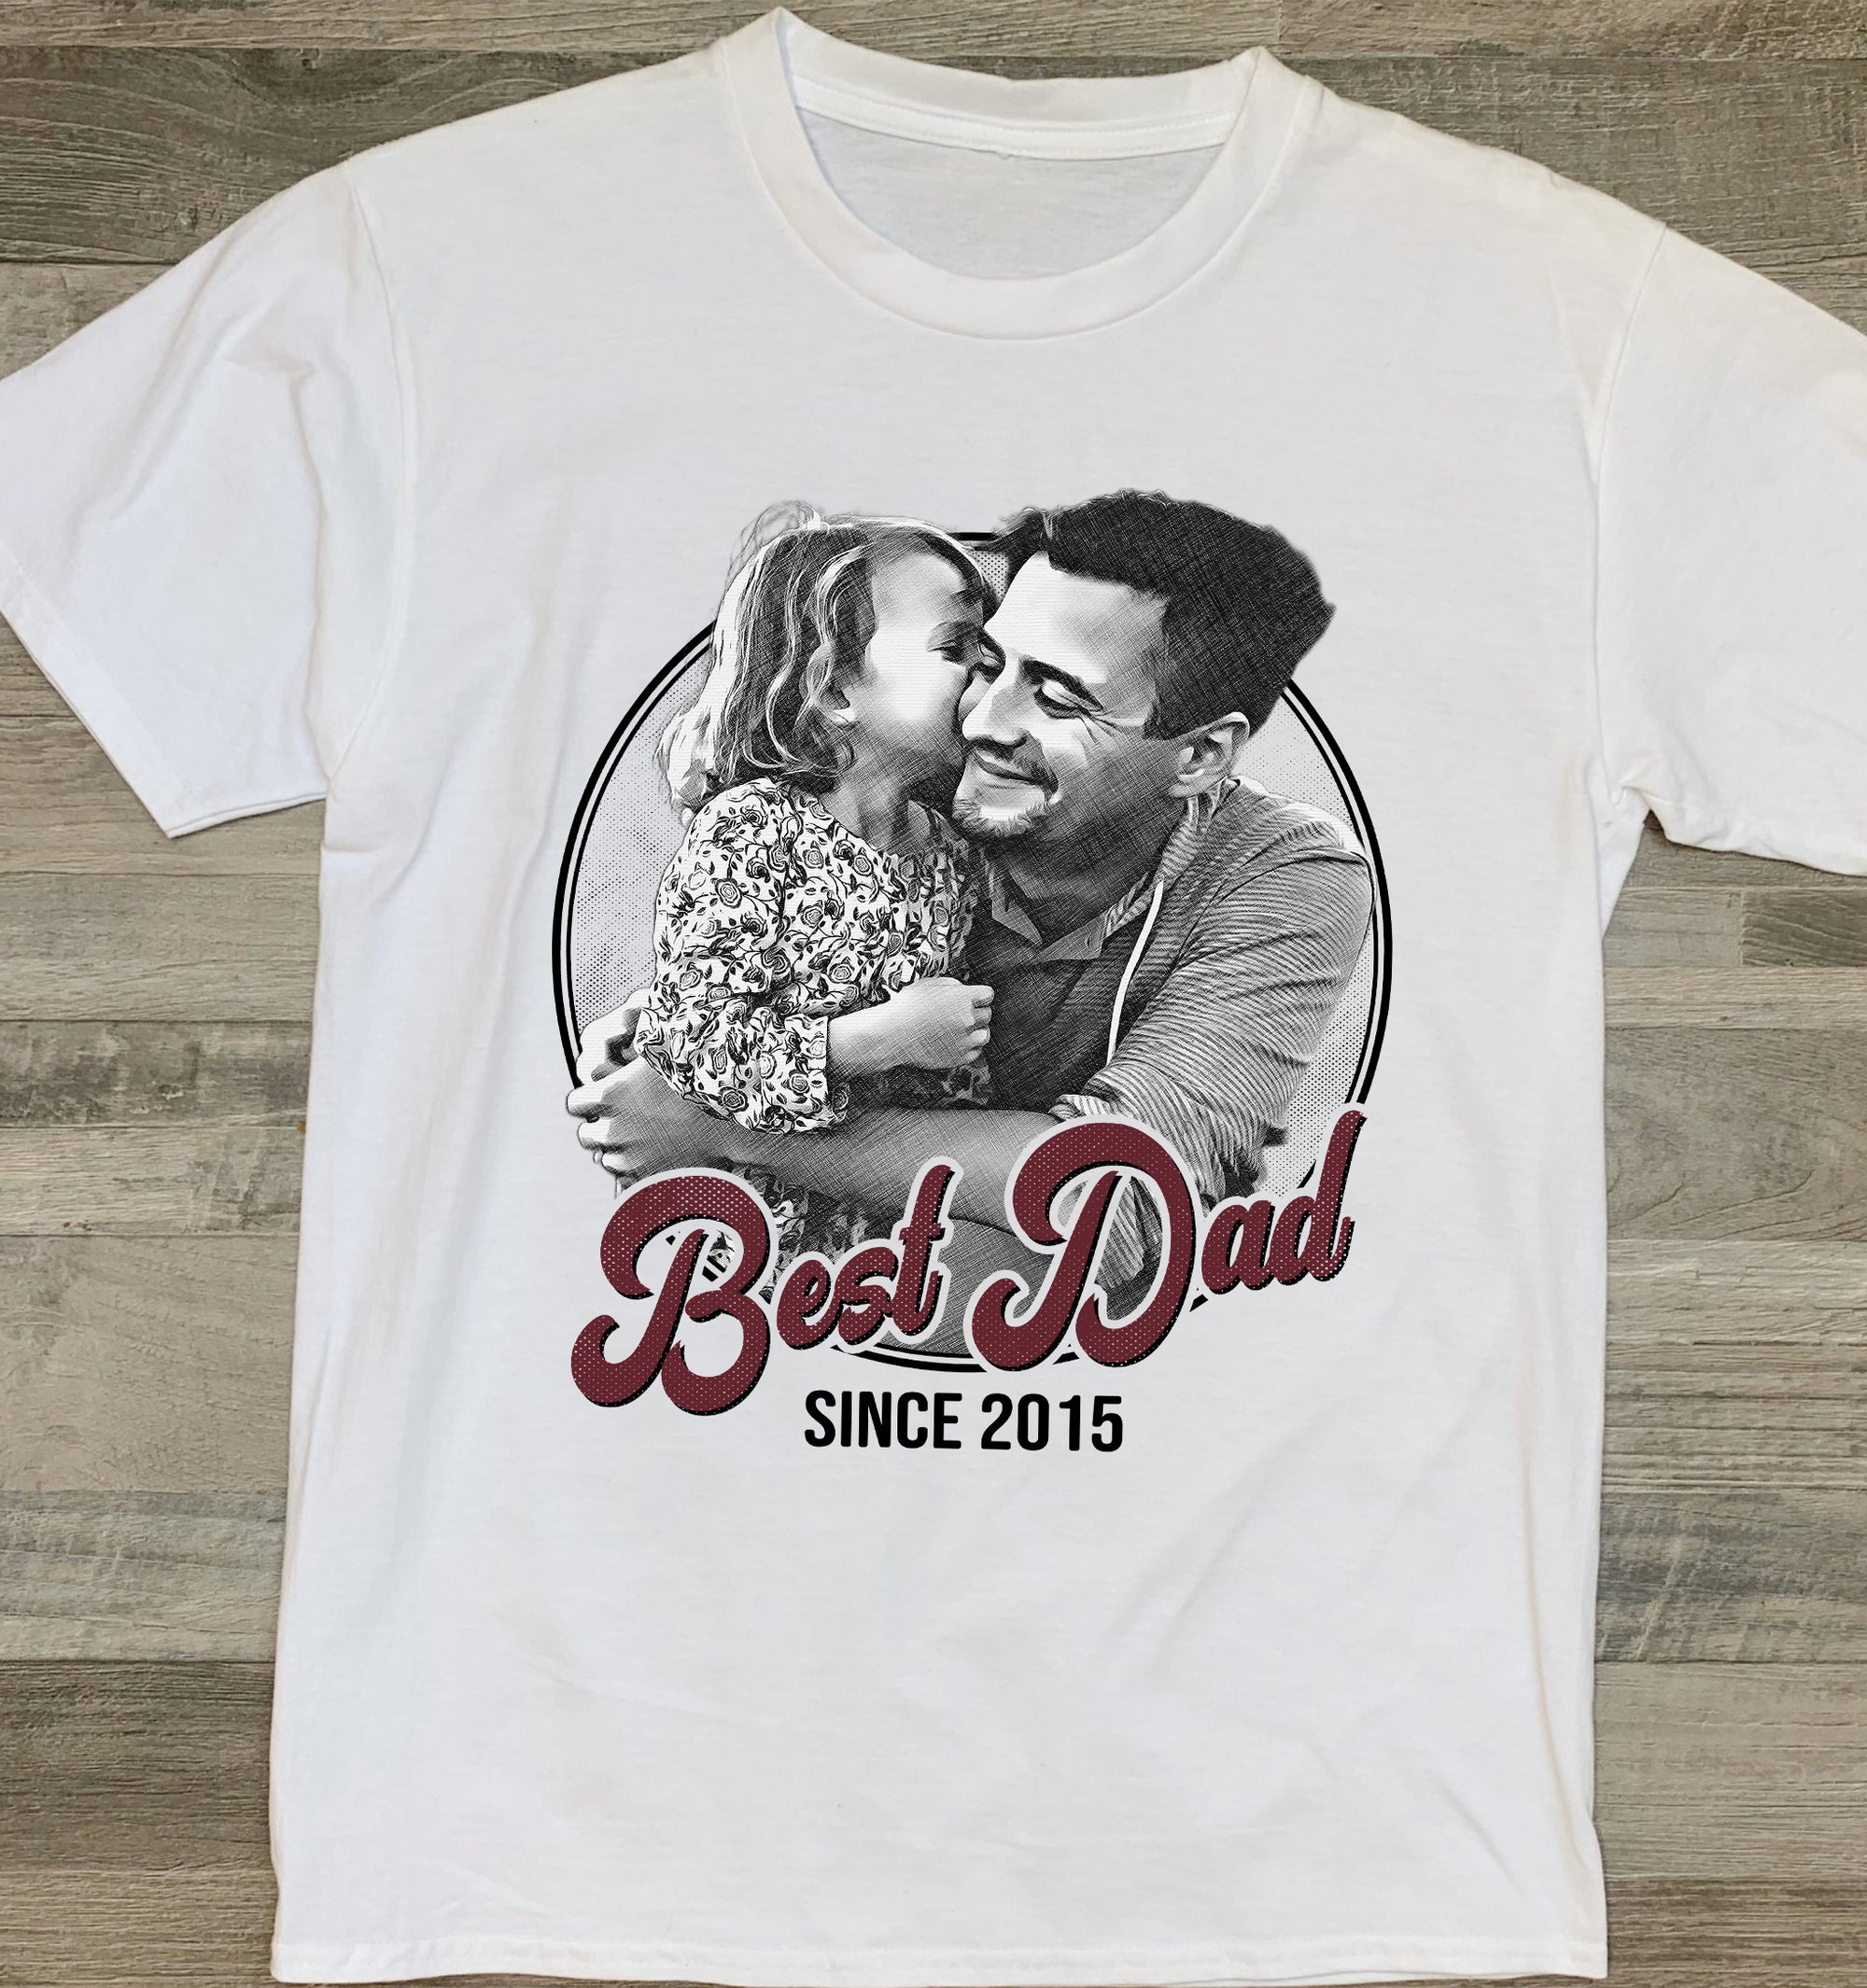 Best Dad - Personalized Photo And Year T-Shirt, Gift For Family, Gift For Father